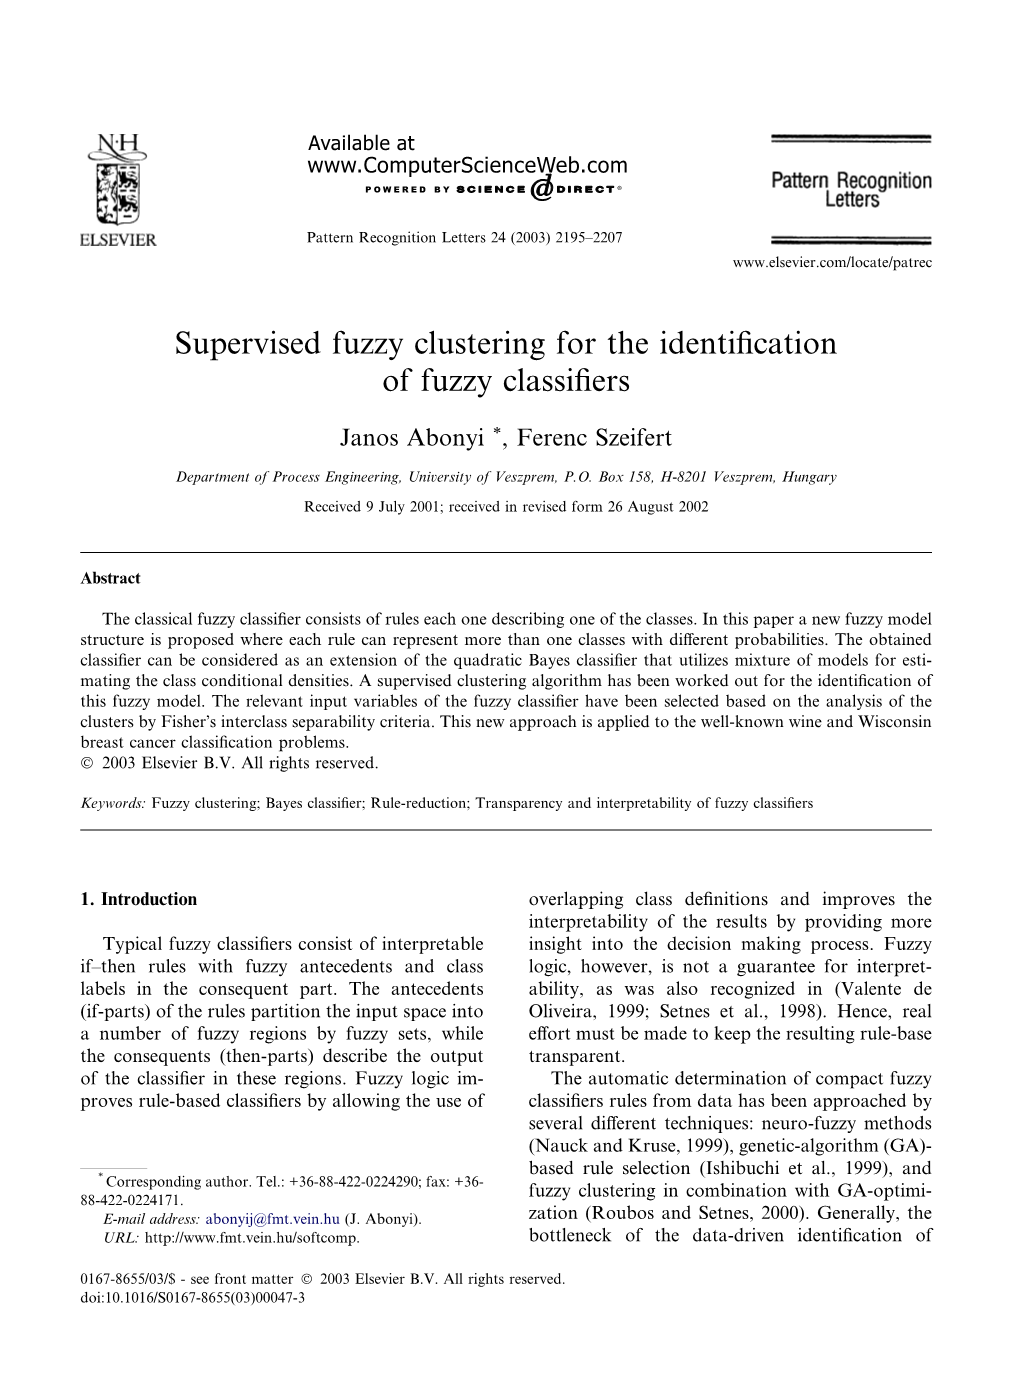 Supervised Fuzzy Clustering for the Identification of Fuzzy Classifiers